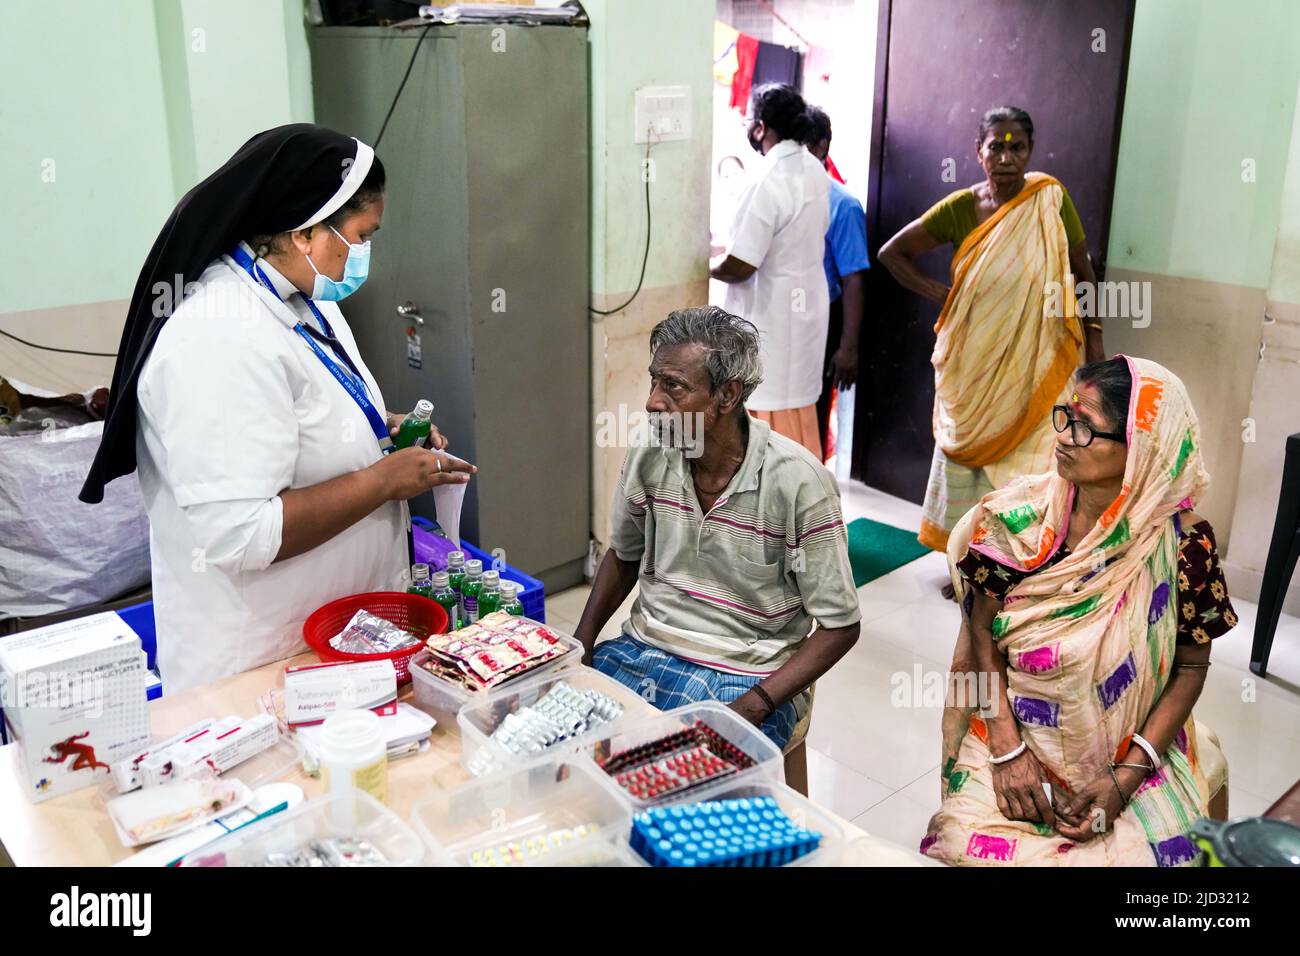 a Catholic sister counsels poor people from a slum on health issues at the Asha Deep Trust's Mobile Clinic in Kolkata, India Stock Photo